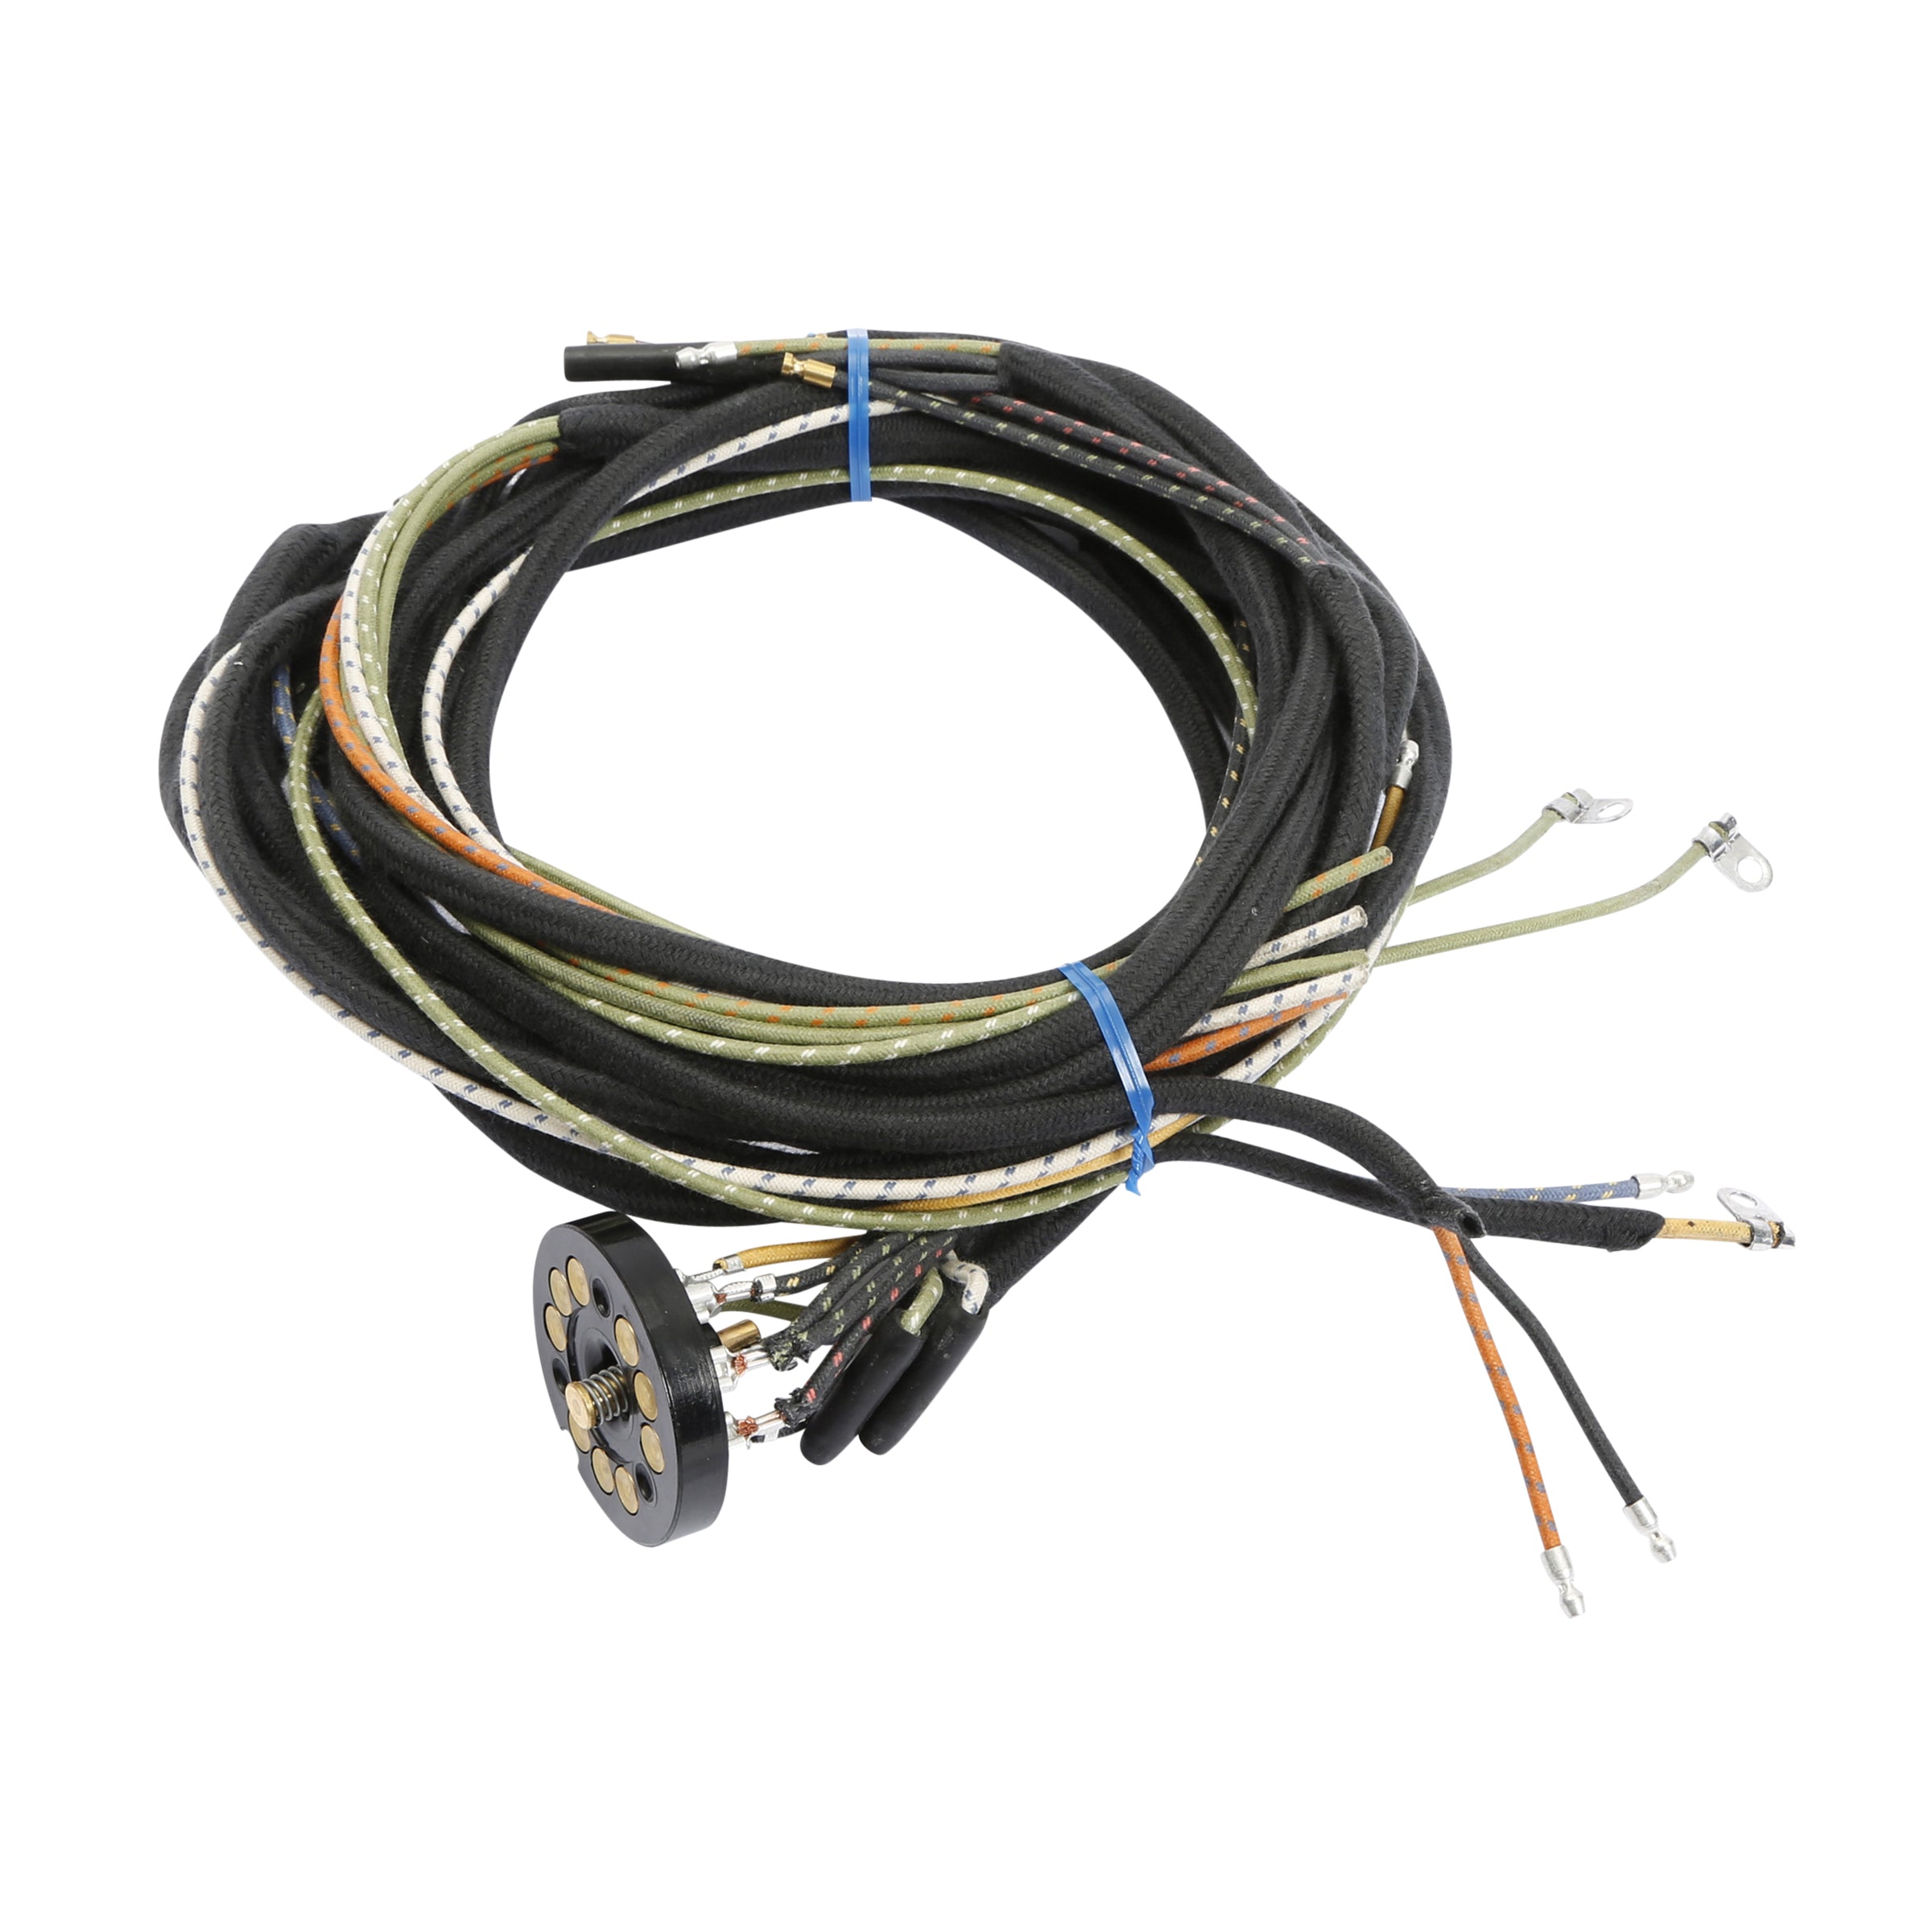 Main Lighting Wire Harness with Turn Indicator (With Cowl Lights) • 1928-31 Model A Ford